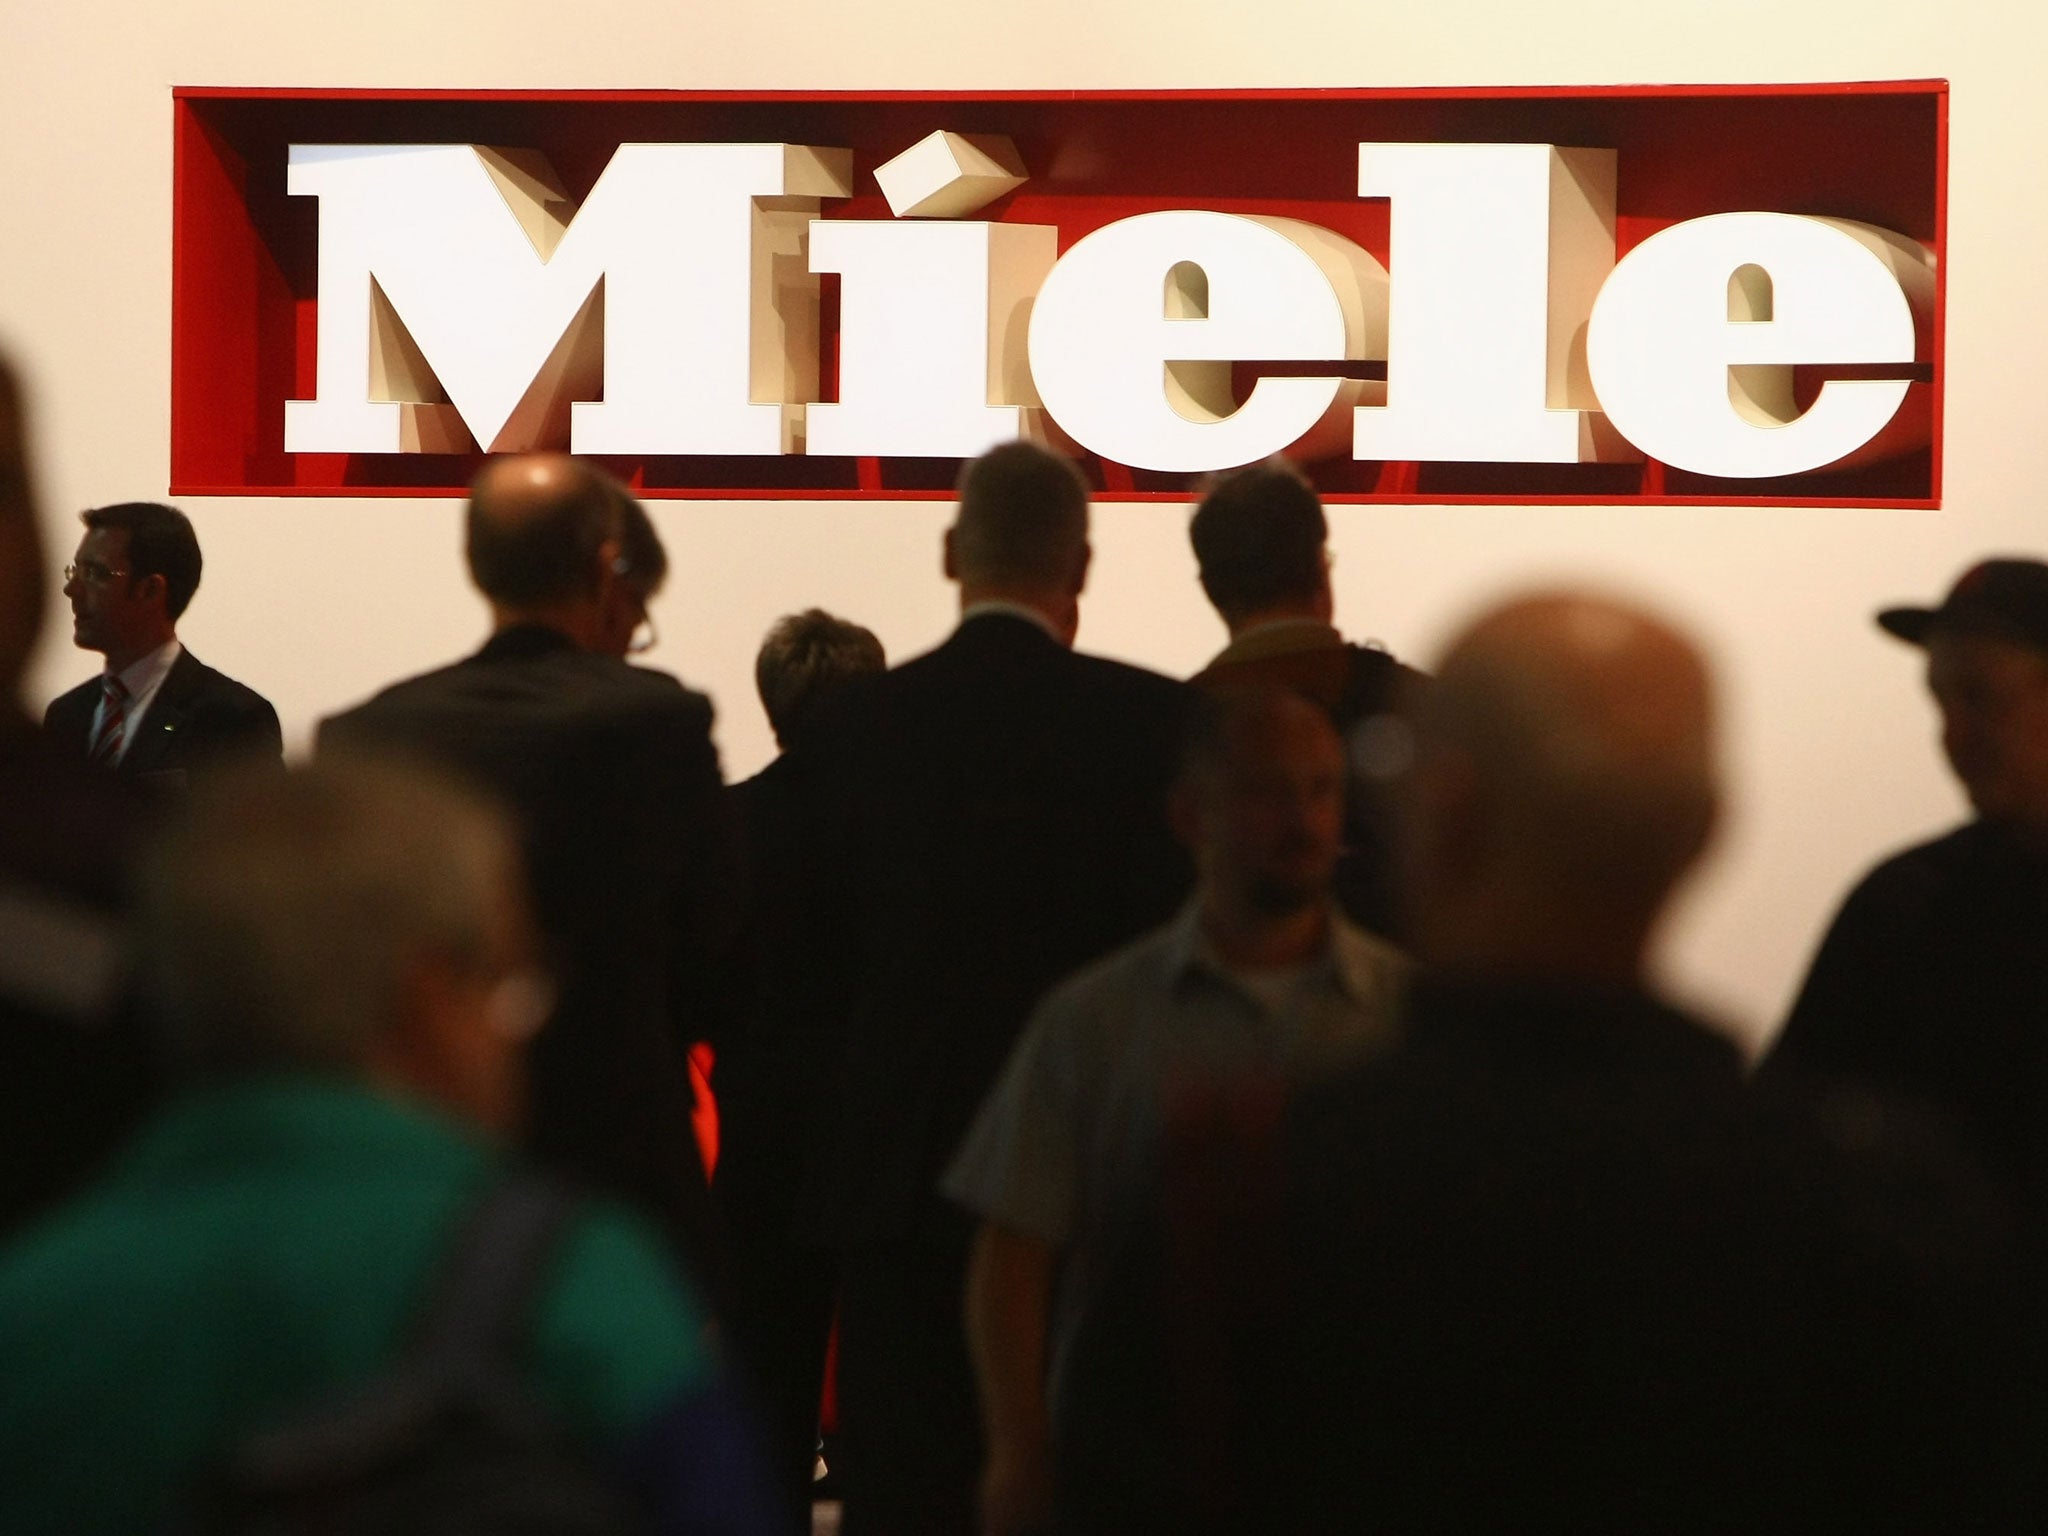 According to a Which? survey on household appliances, German company Miele was rated the best in seven of nine categories